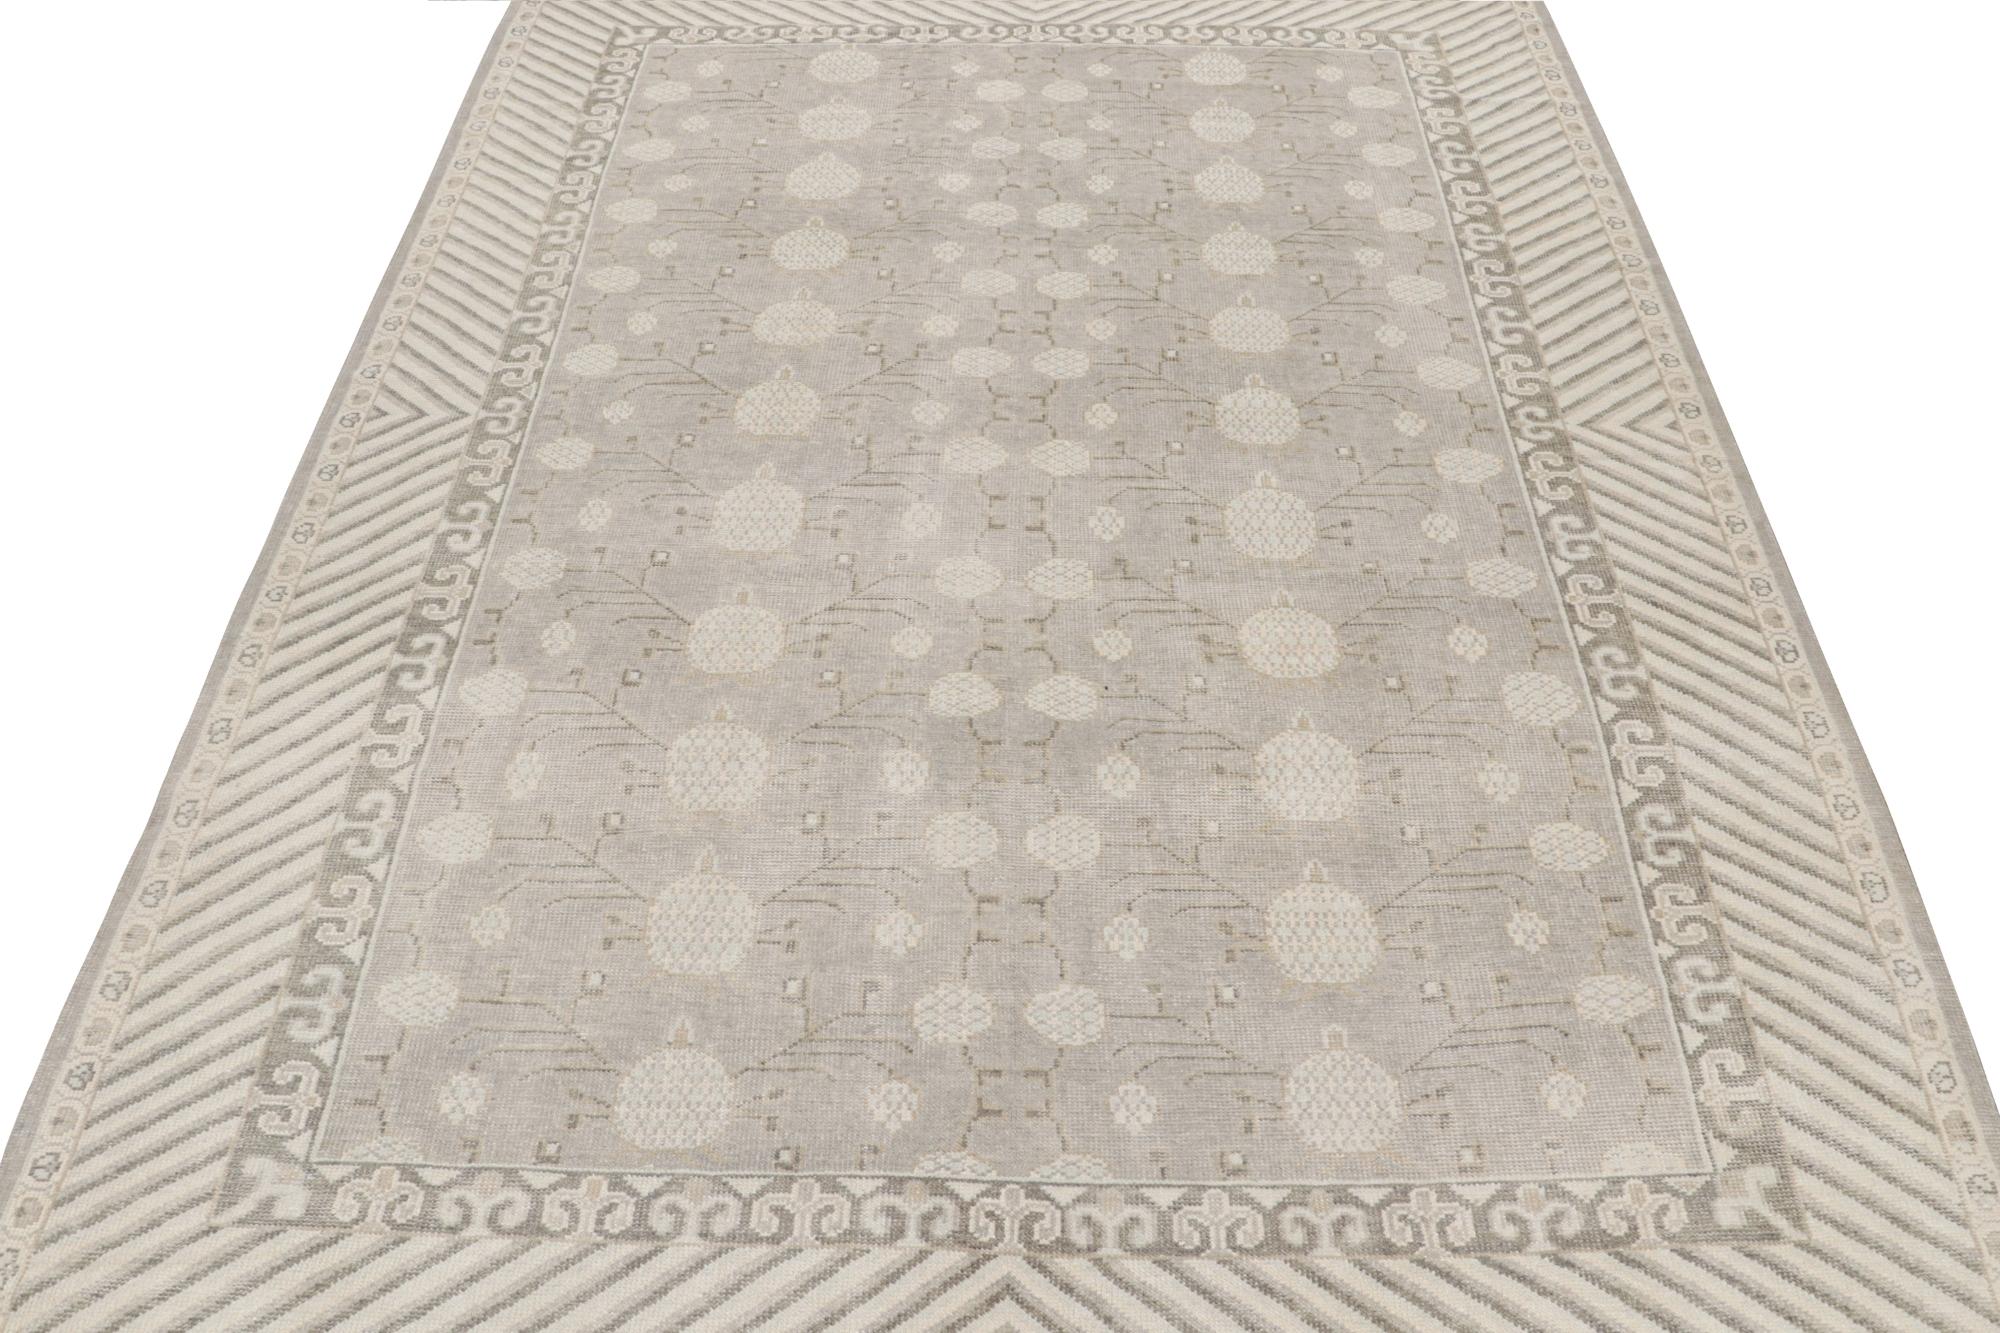 Rug & Kilim's Handmade Khotan Style Rug in Beige Gray Pomegranate Pattern In New Condition For Sale In Long Island City, NY